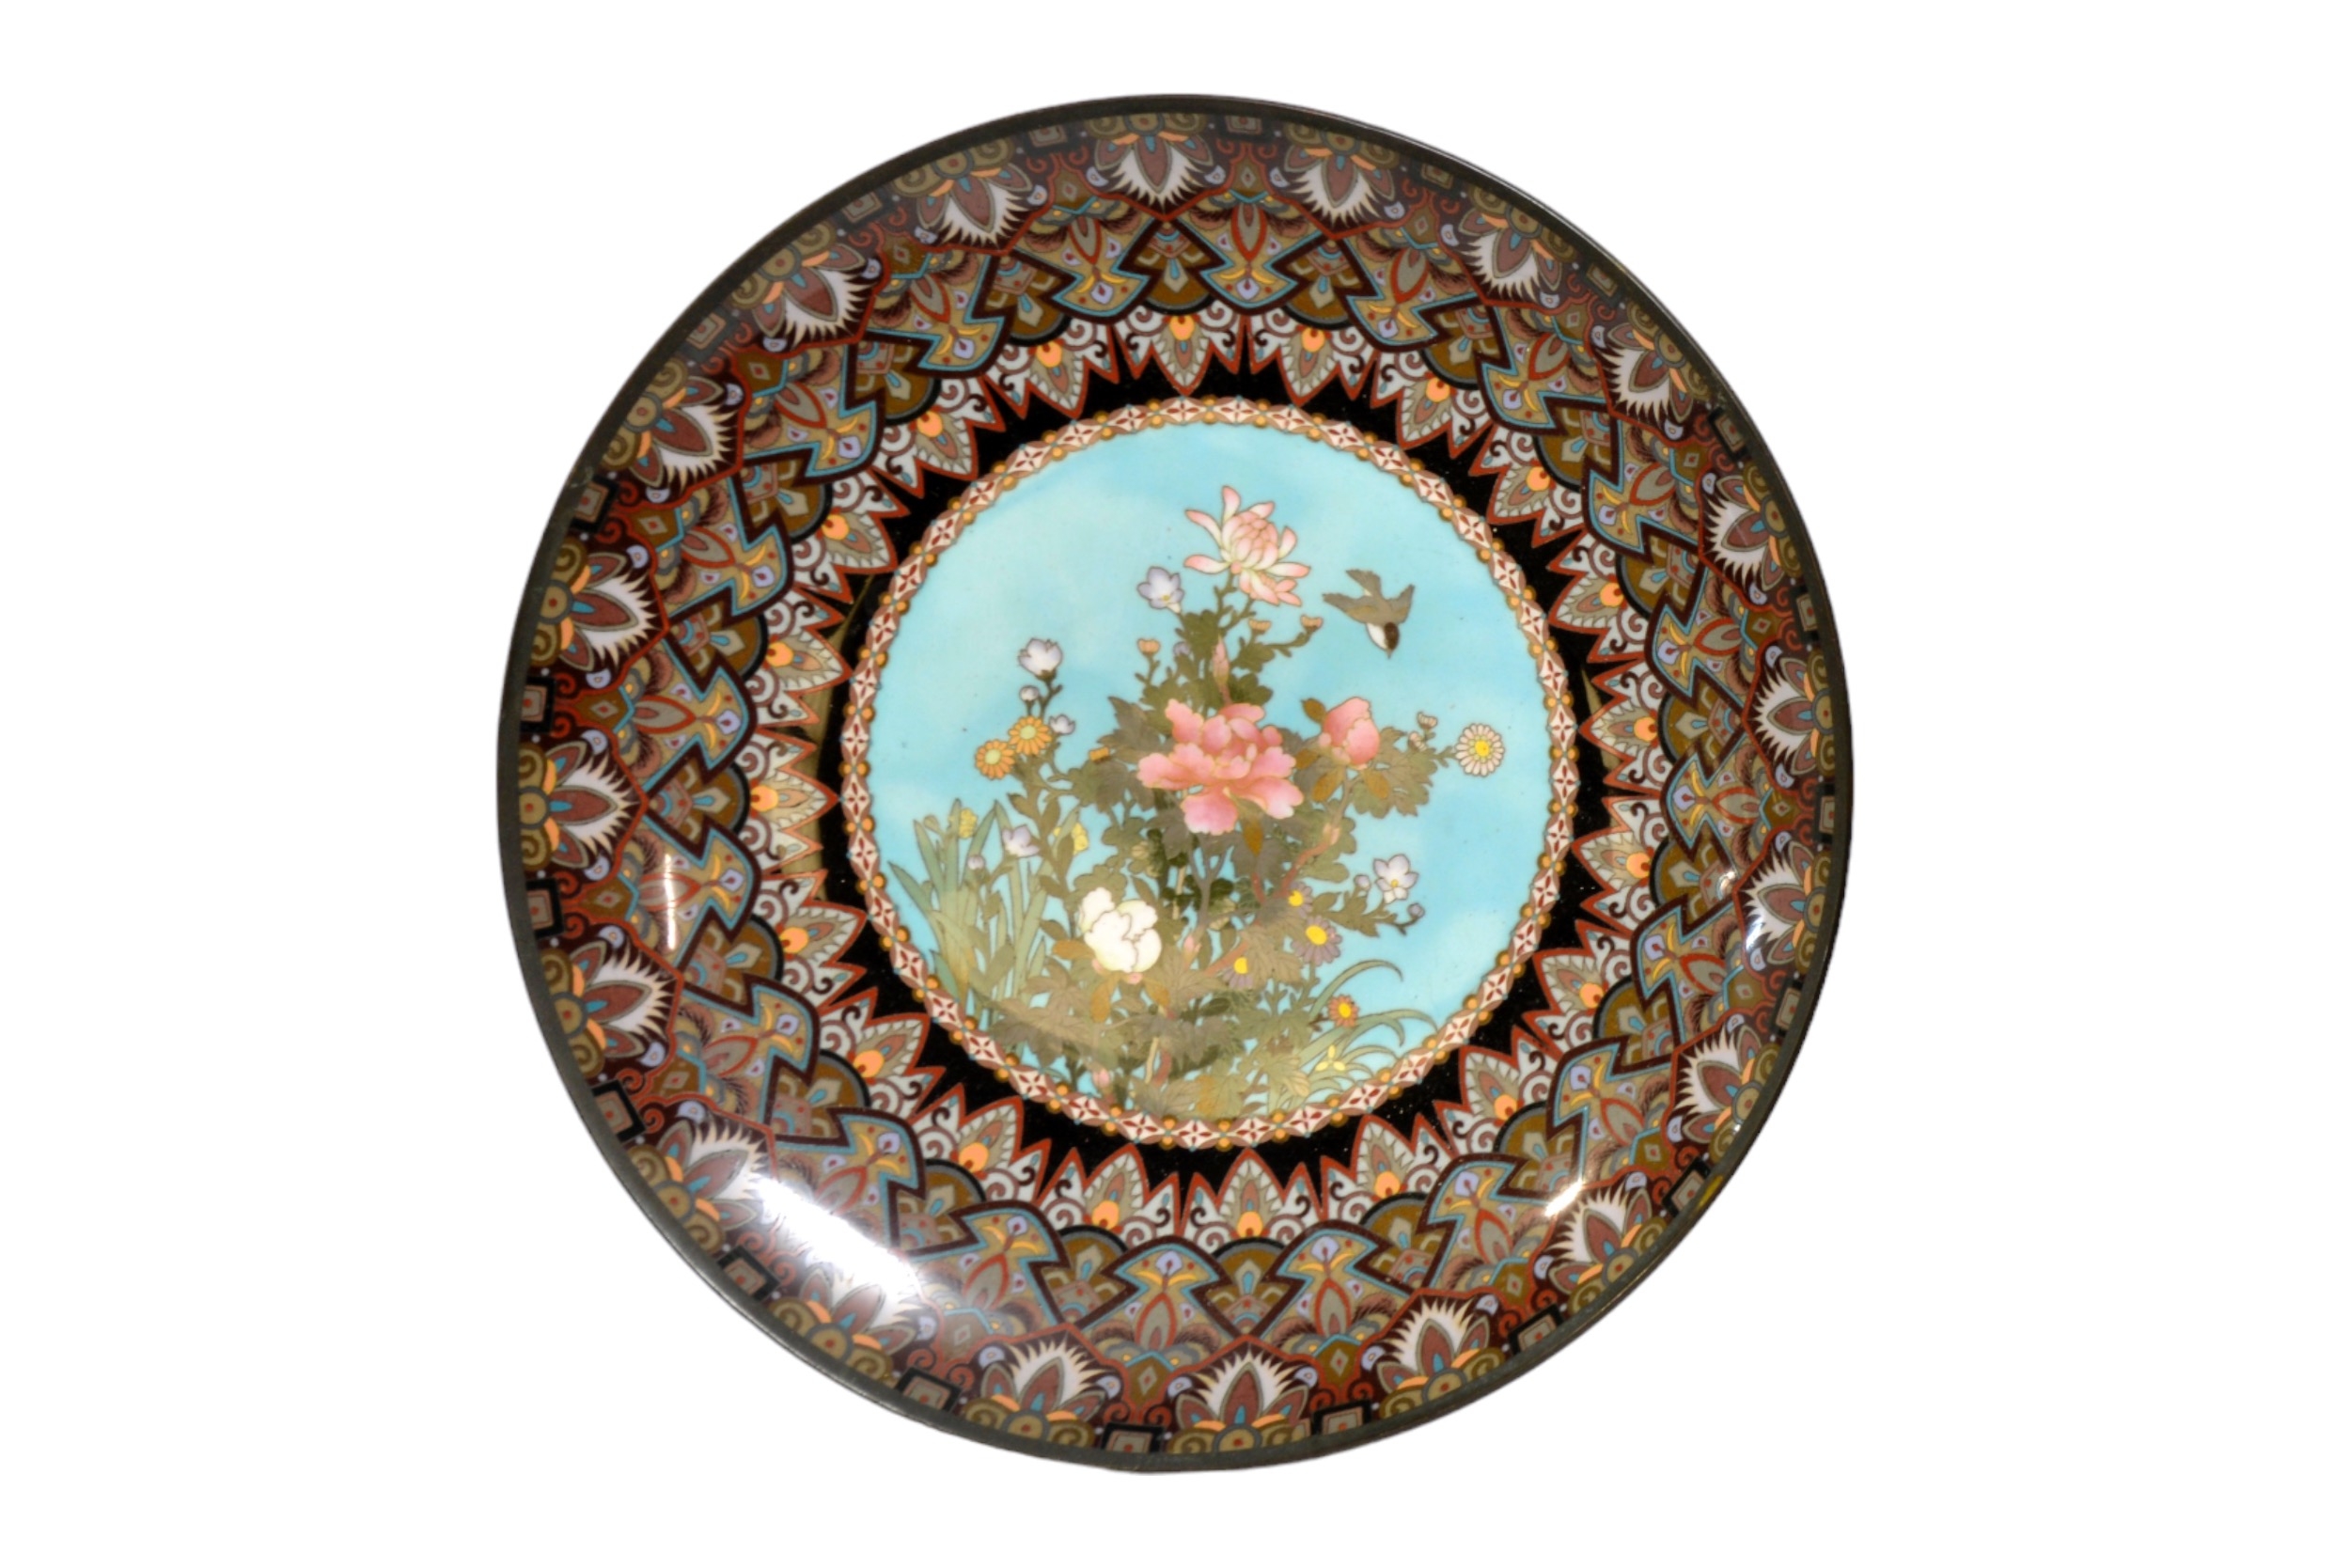 A JAPANESE CLOISONNE CHARGER decorated with a bird flying above flowers, the border with a layered